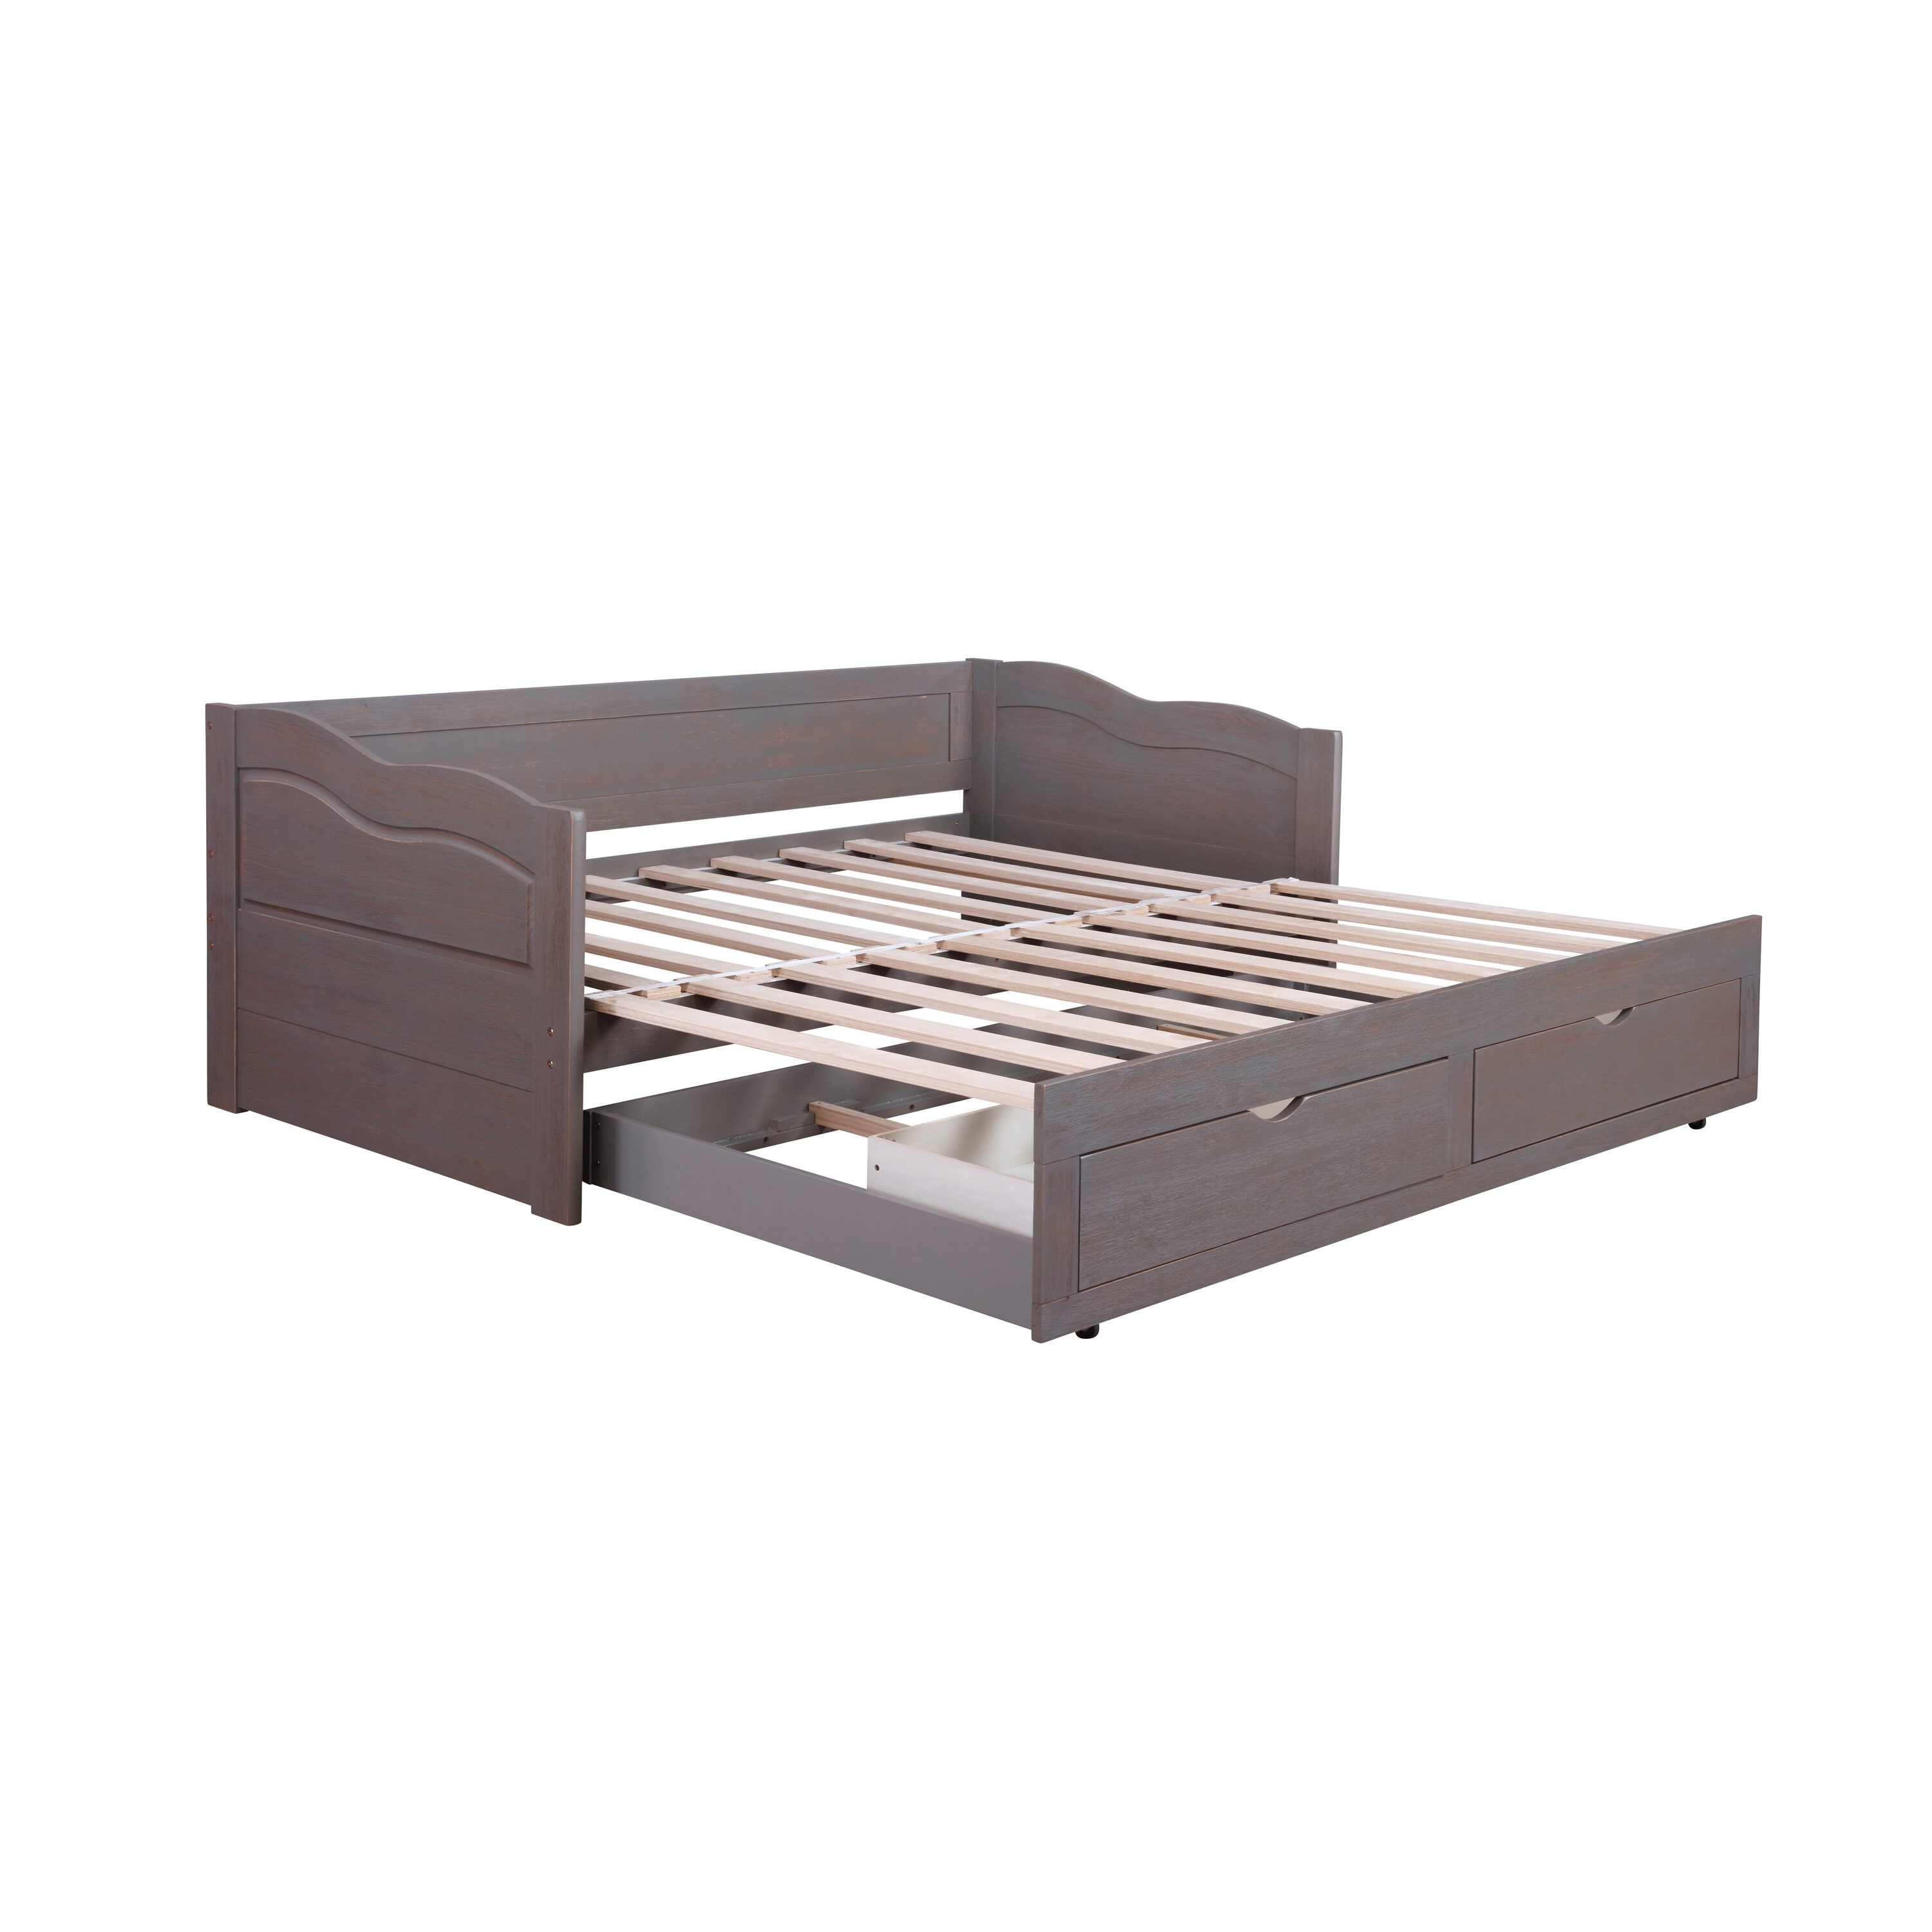 Furniture of America Redney Gray Twin Wood Daybed with Storage at Lowes.com